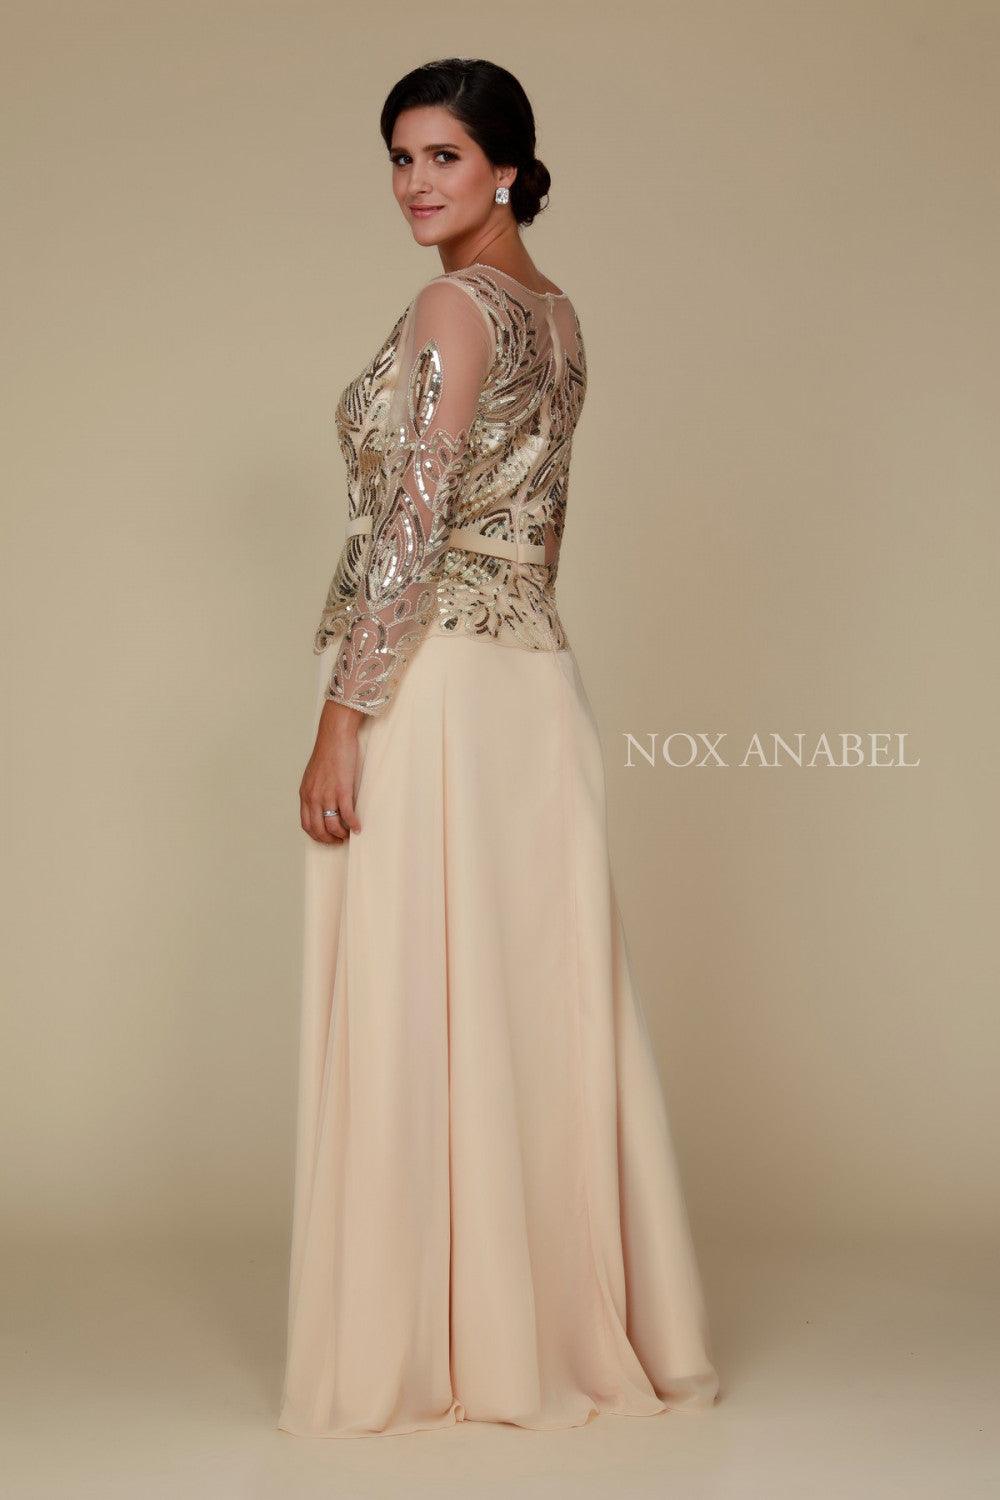 Long Sleeve Mother of the Bride Dress - The Dress Outlet Nox Anabel